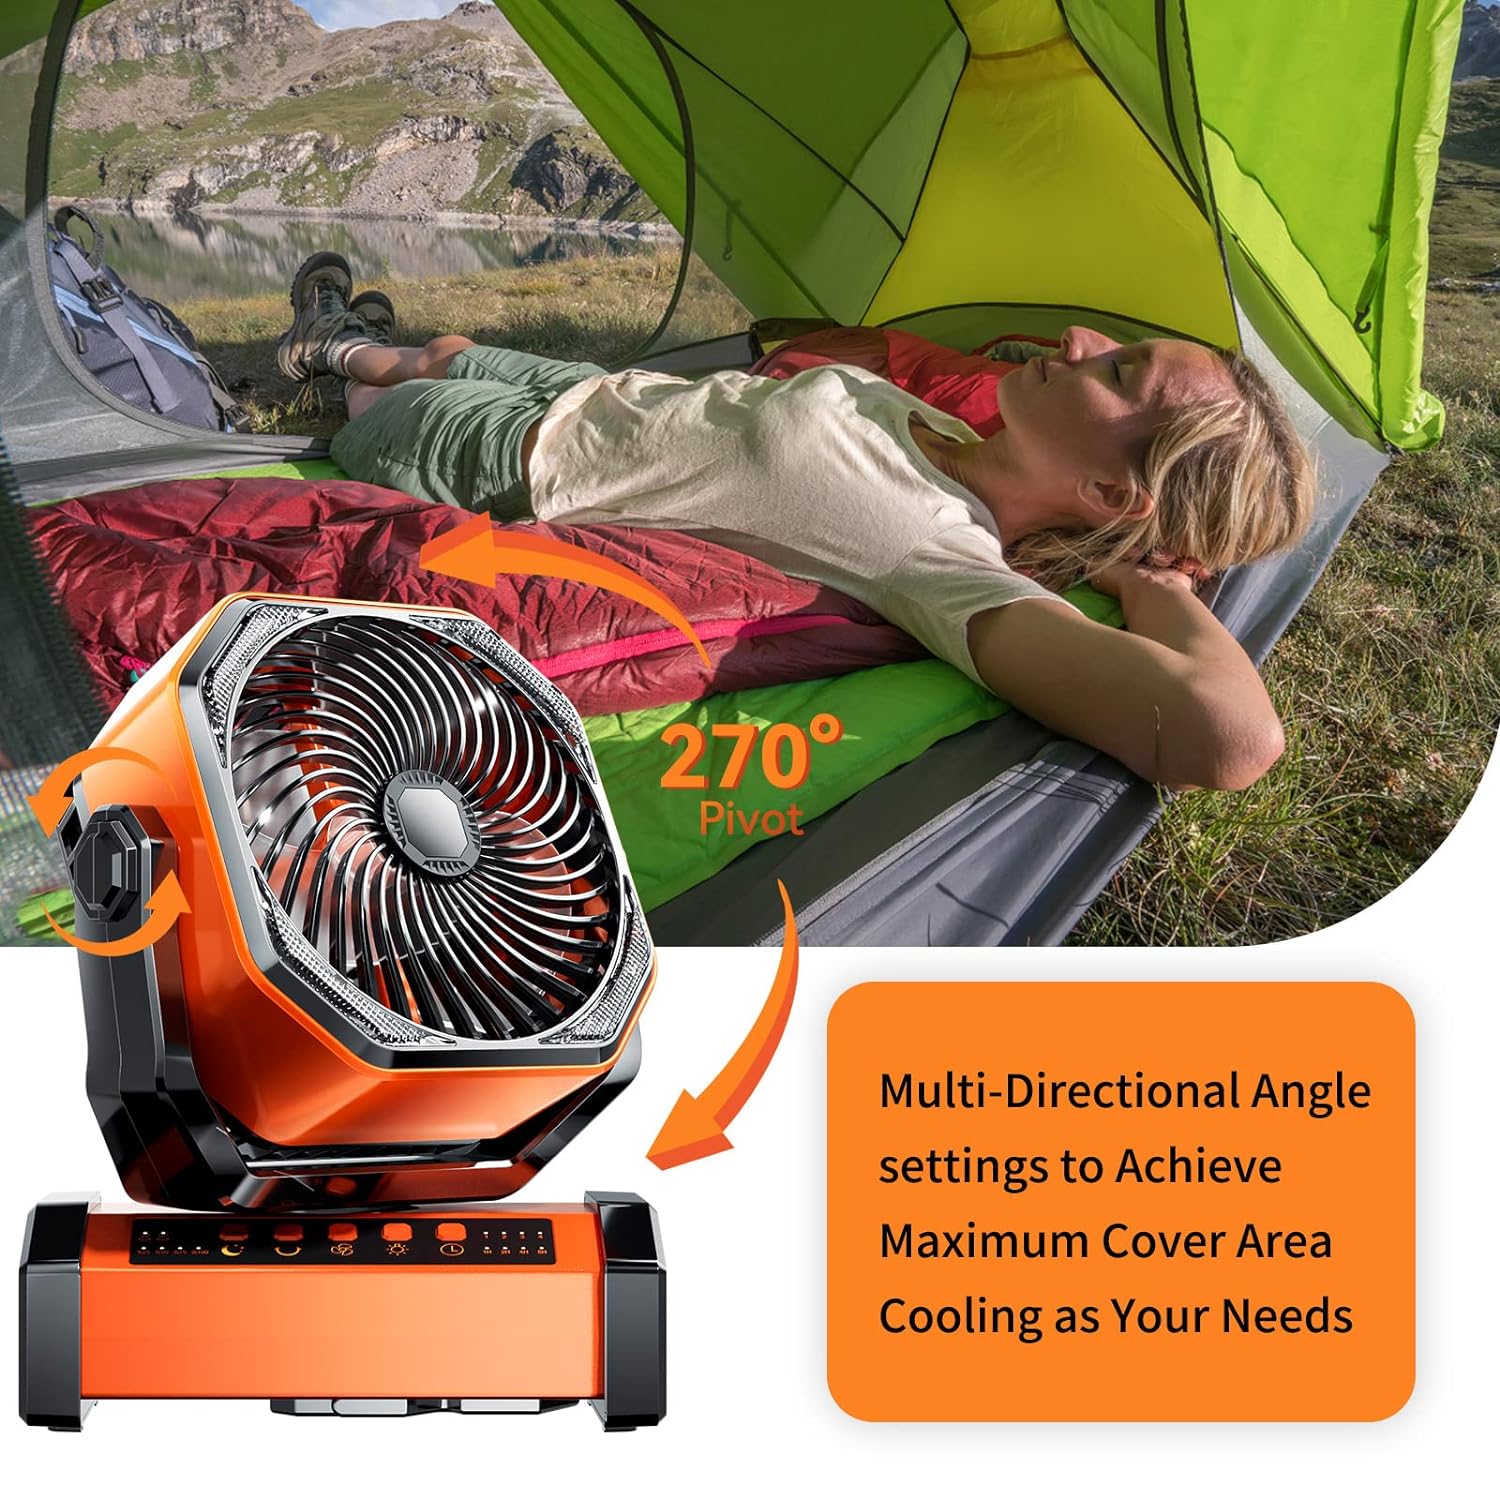 Camping LED Fan with Light, 20000mAh Rechargeable Battery Powered Outdoor Tent Fan with Light and Hook, 4 Speed, Personal USB Desk Fan for Camping, Fishing, Power Outage,Hurricane, Worksite